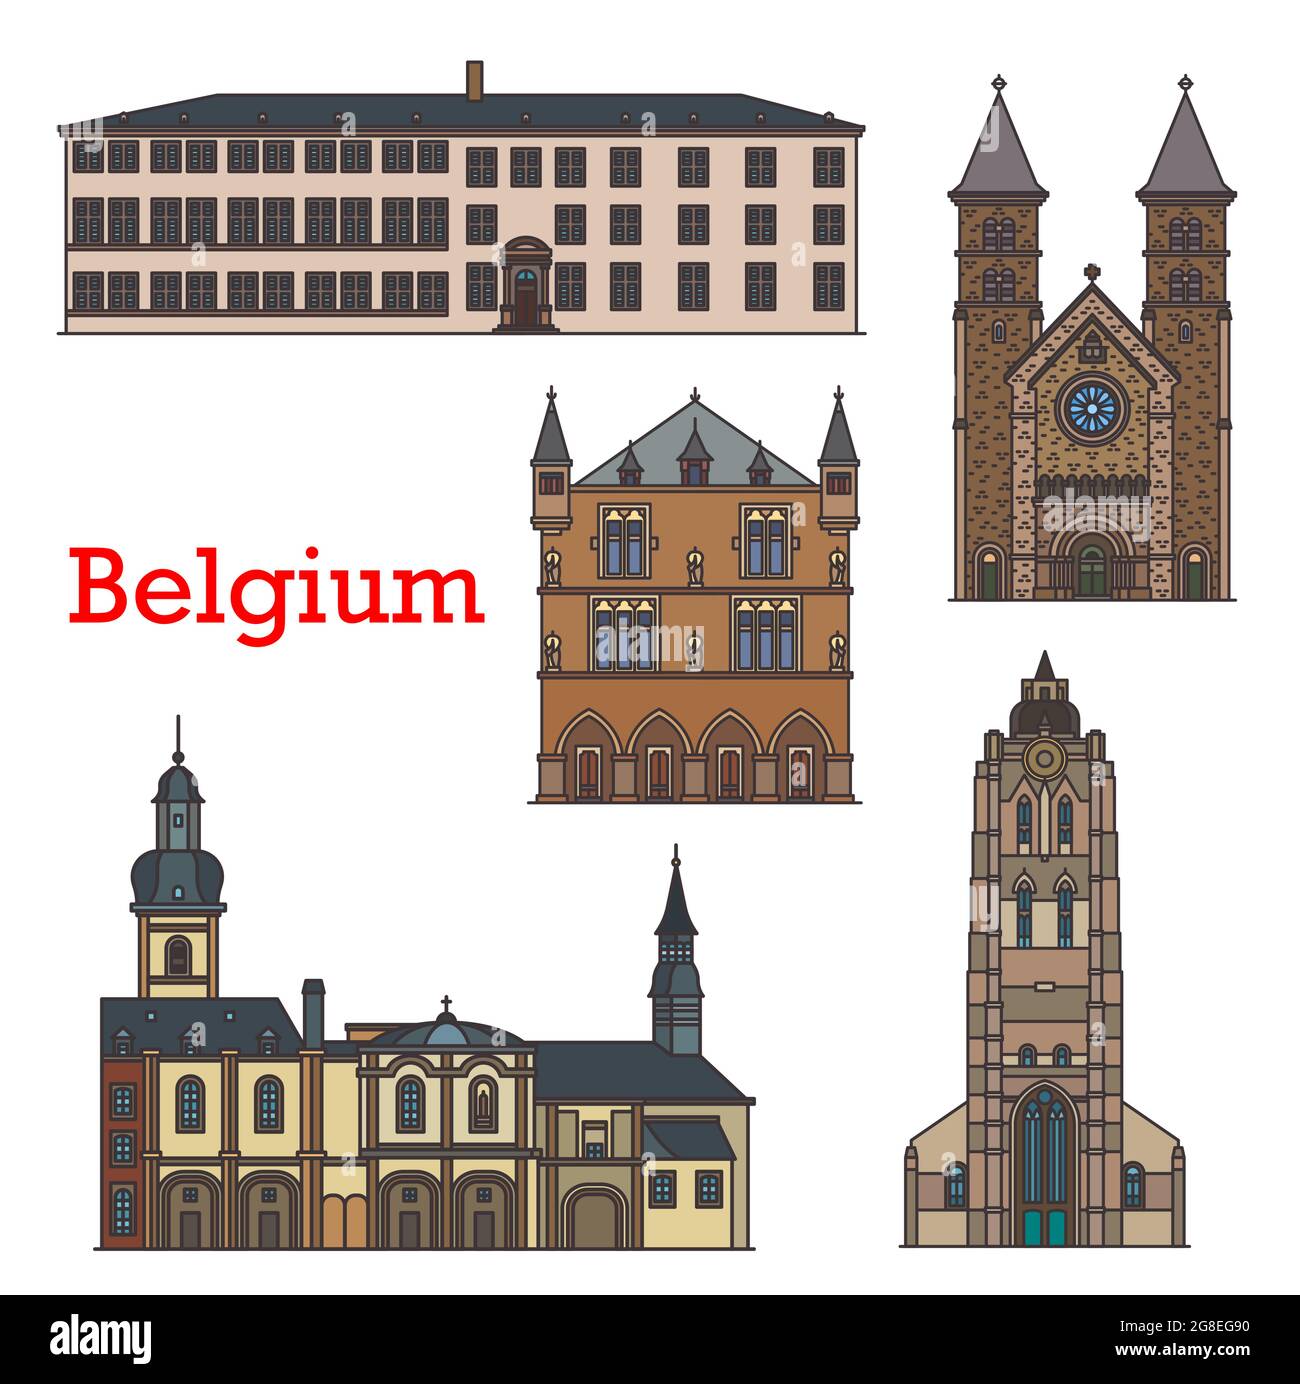 Luxembourg landmarks, architecture buildings, vector travel sightseeing. Basilica of Saint Willibrord at Echternach, Grand Duchy and city hall Stadhau Stock Vector